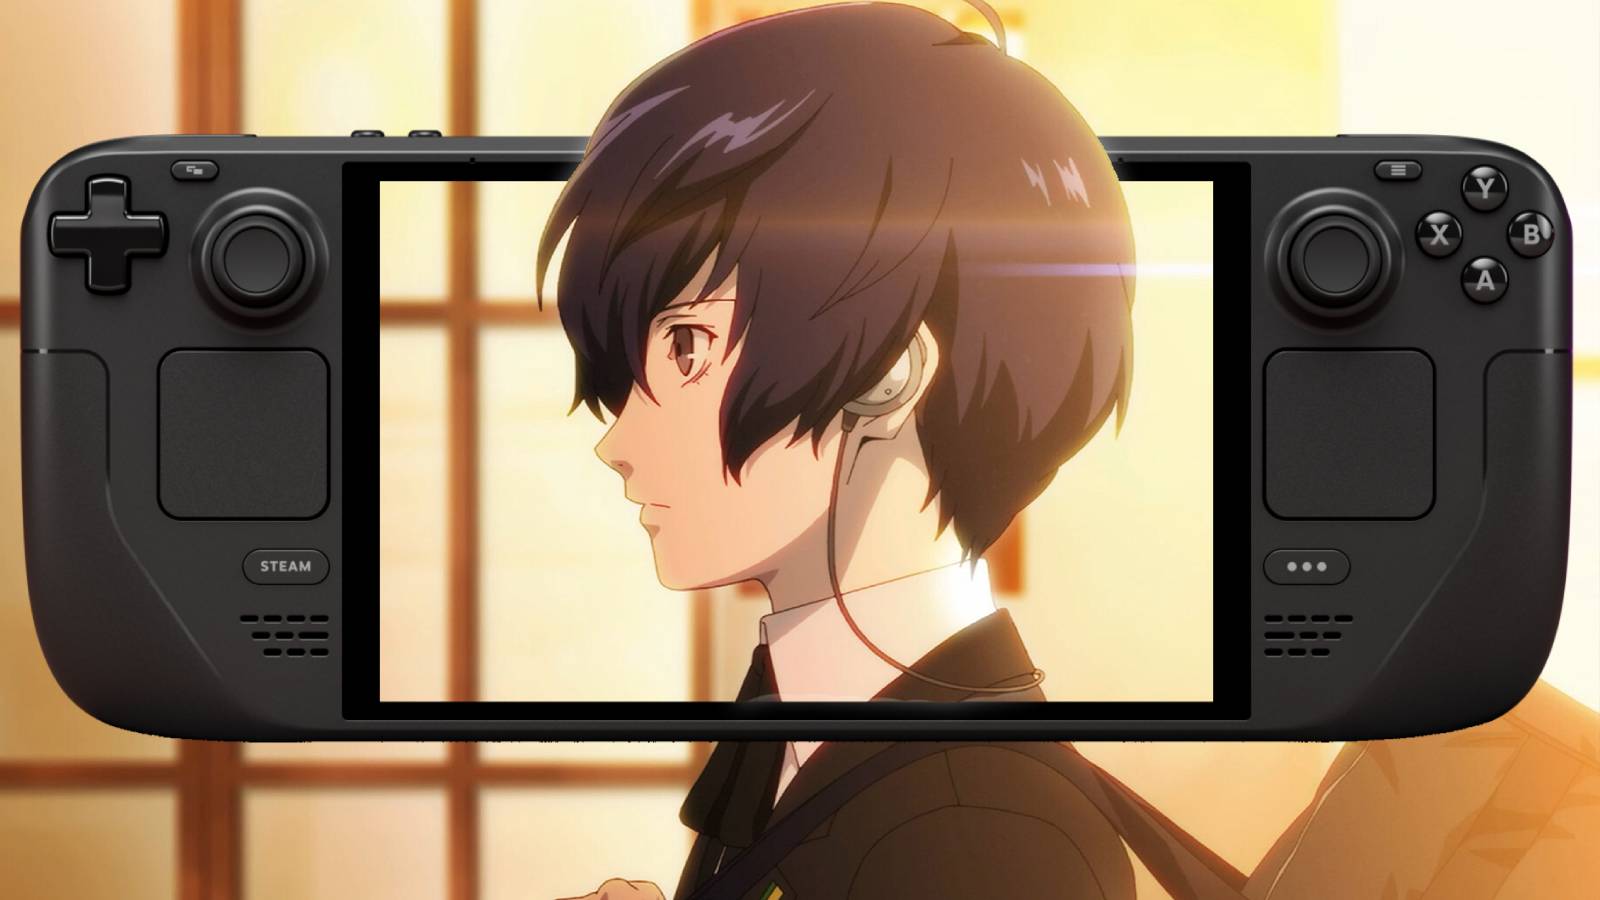 Image of the protag from Persona 3 Reload on the screen of the Steam Deck OLED.